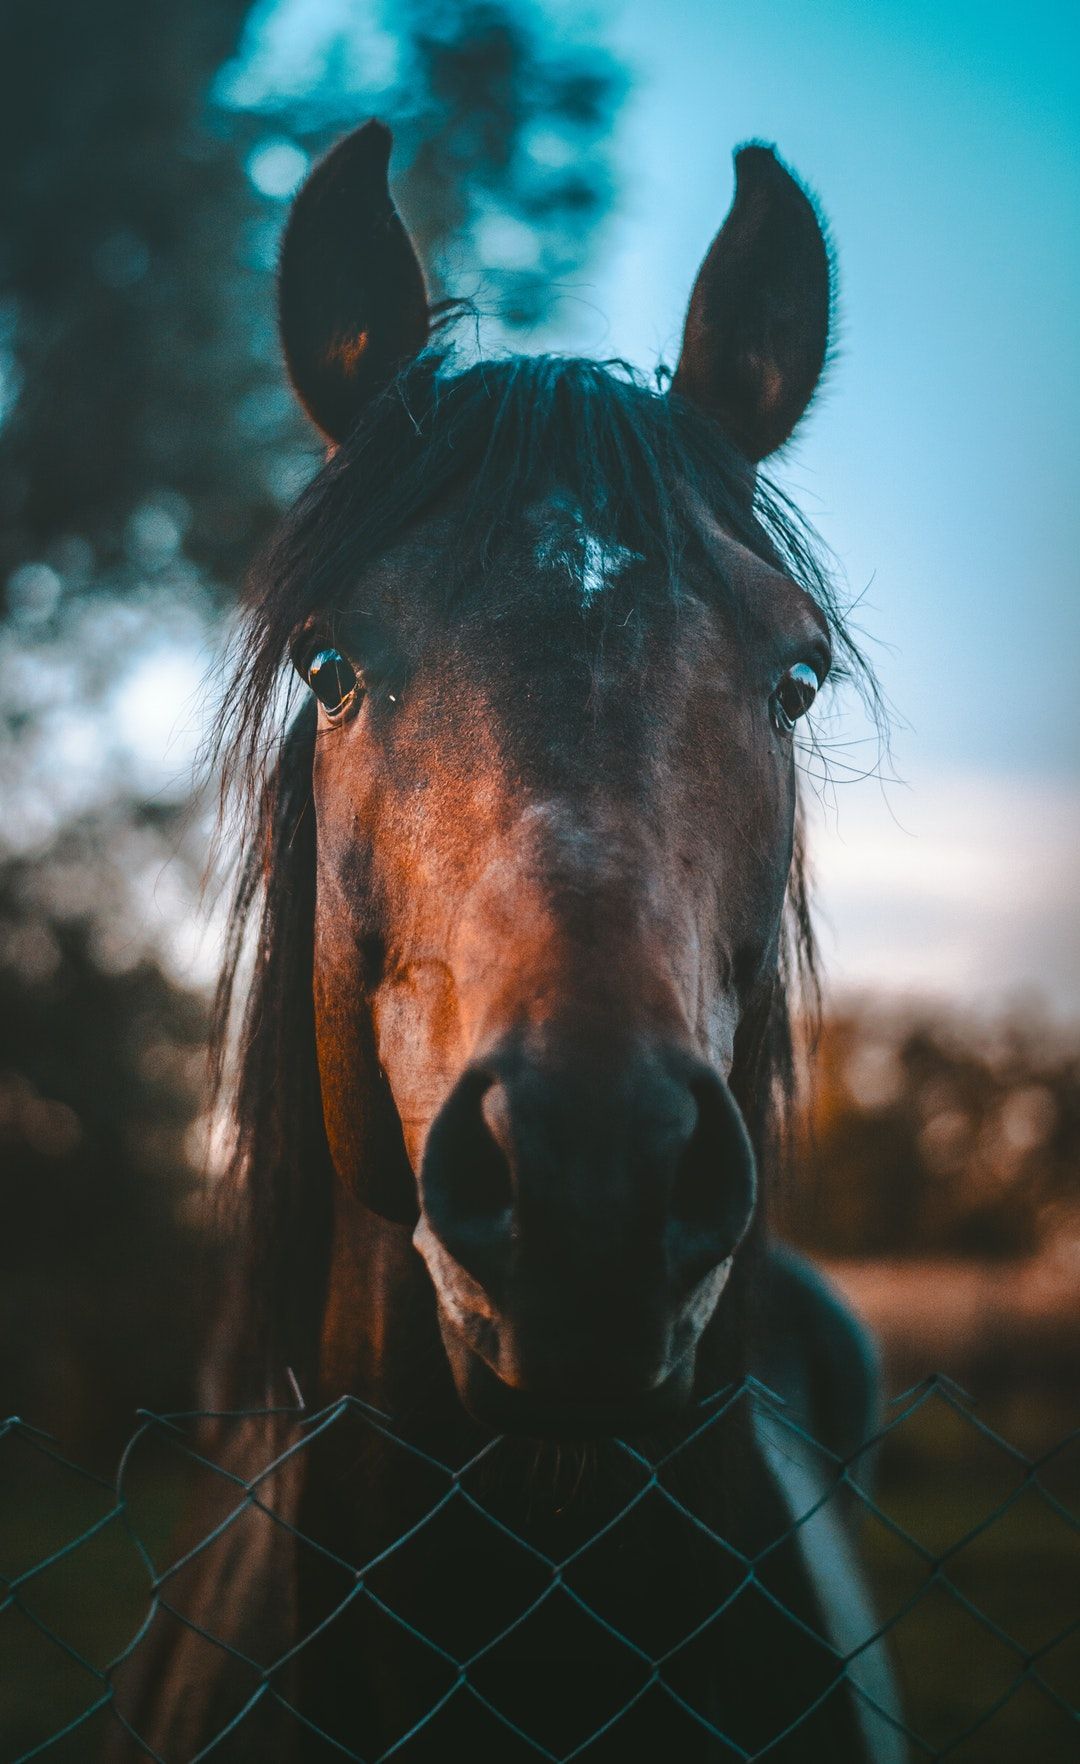 Animal, horse, iphone wallpaper and download HD photo by Marko Blažević. Horse wallpaper, Horses, Pretty horses